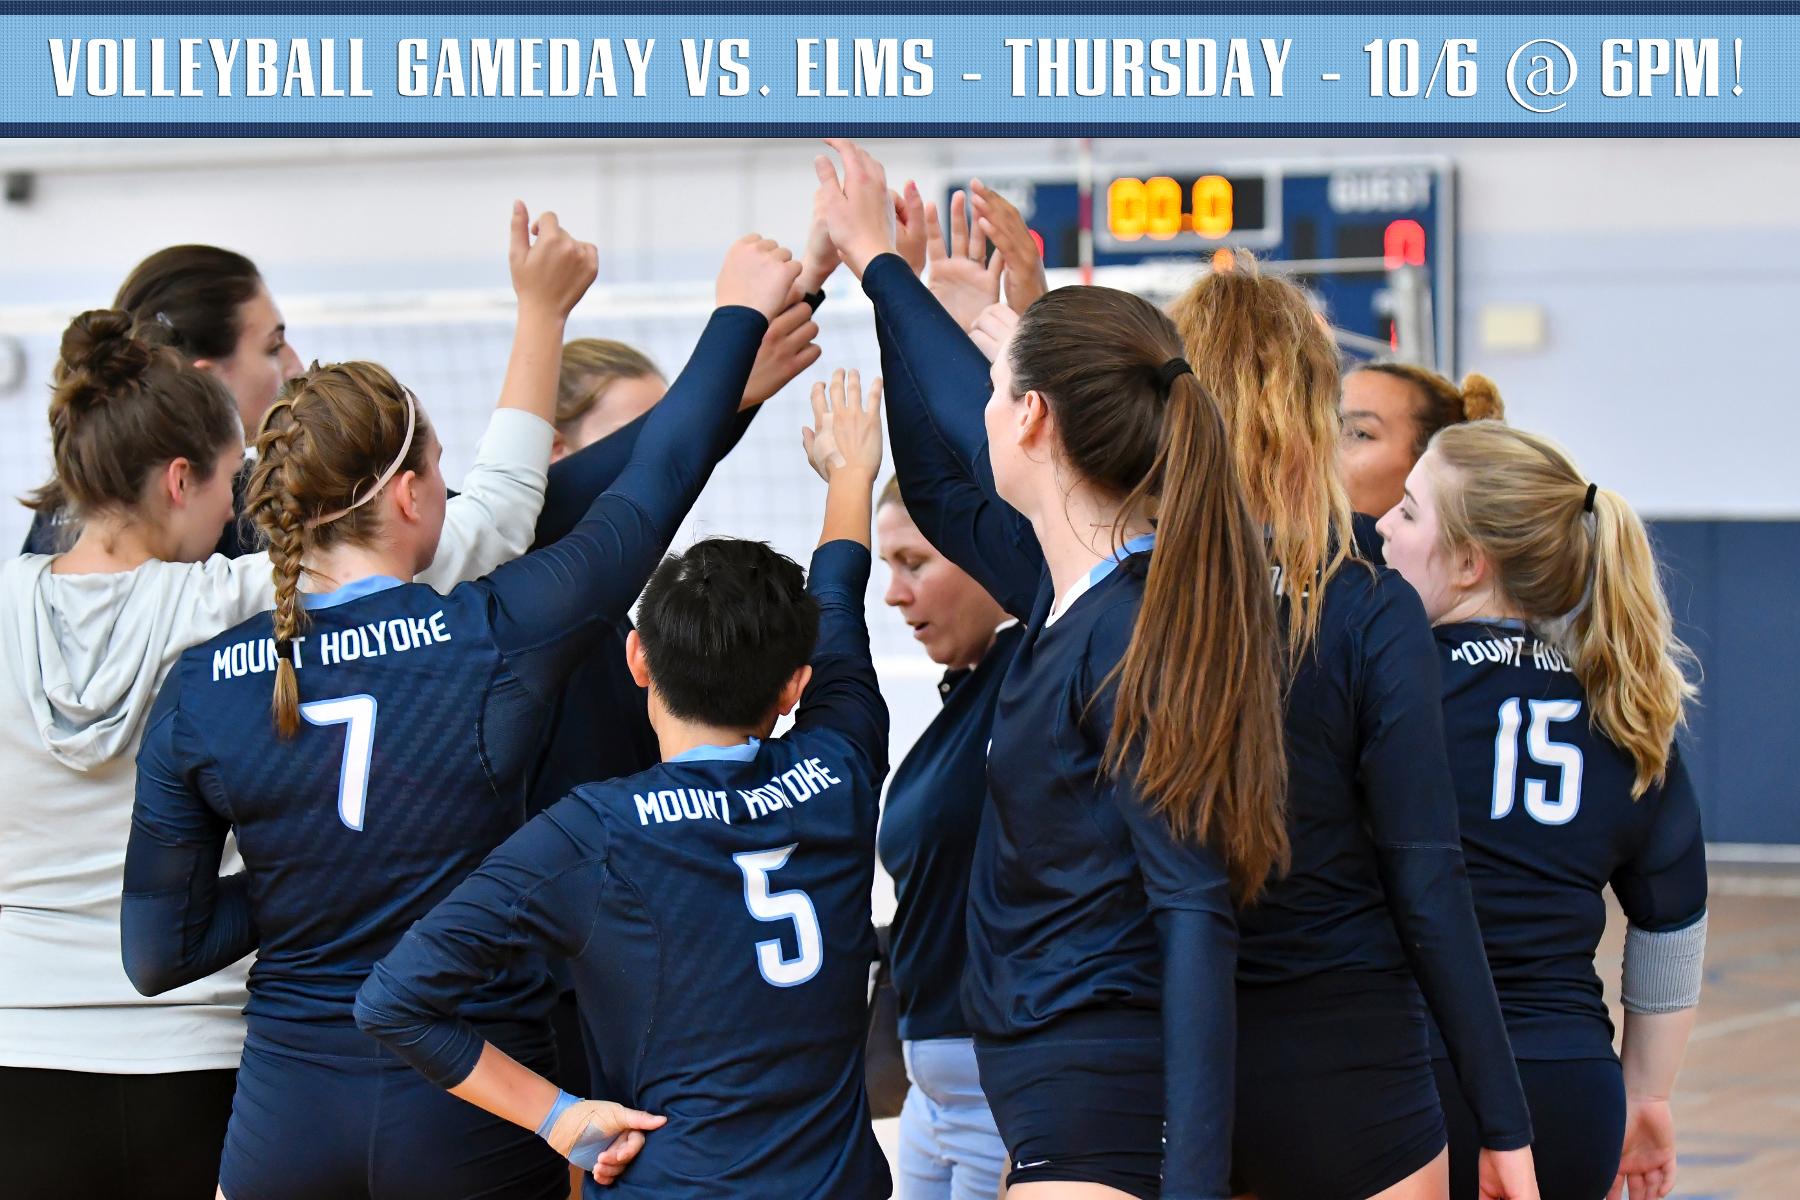 Lyons Game Day Central: Volleyball vs. Elms on Thursday